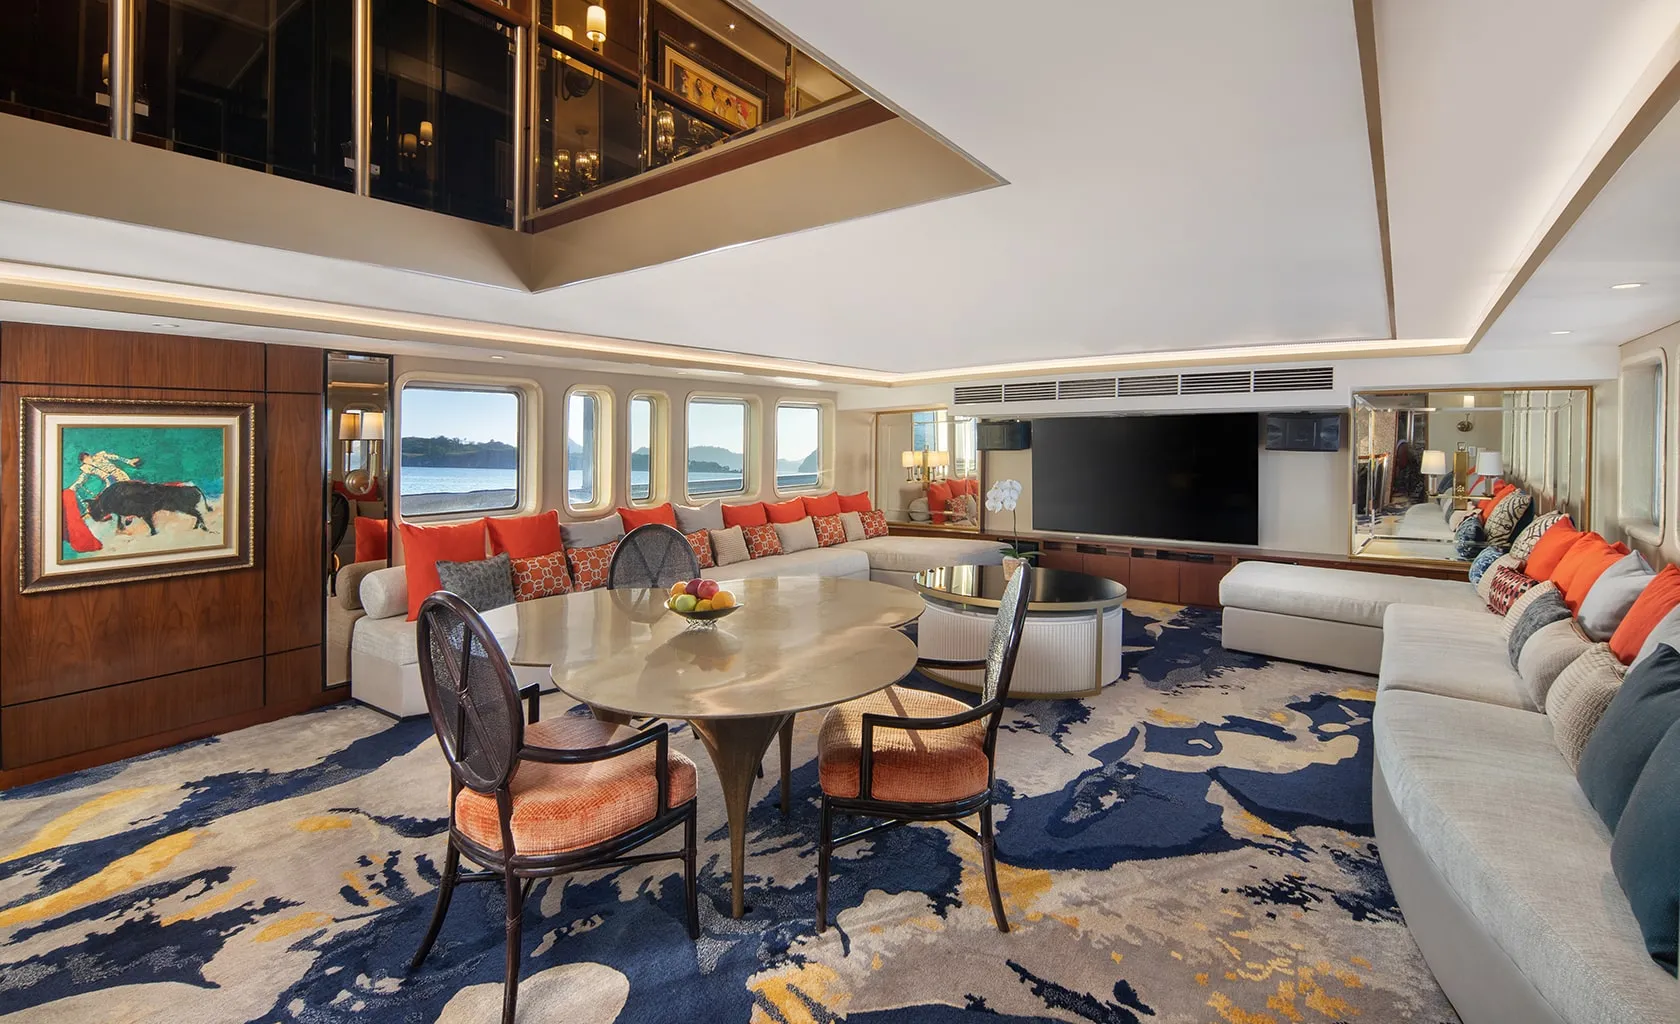 THE TRANS LUXURY YACHT Lounge area